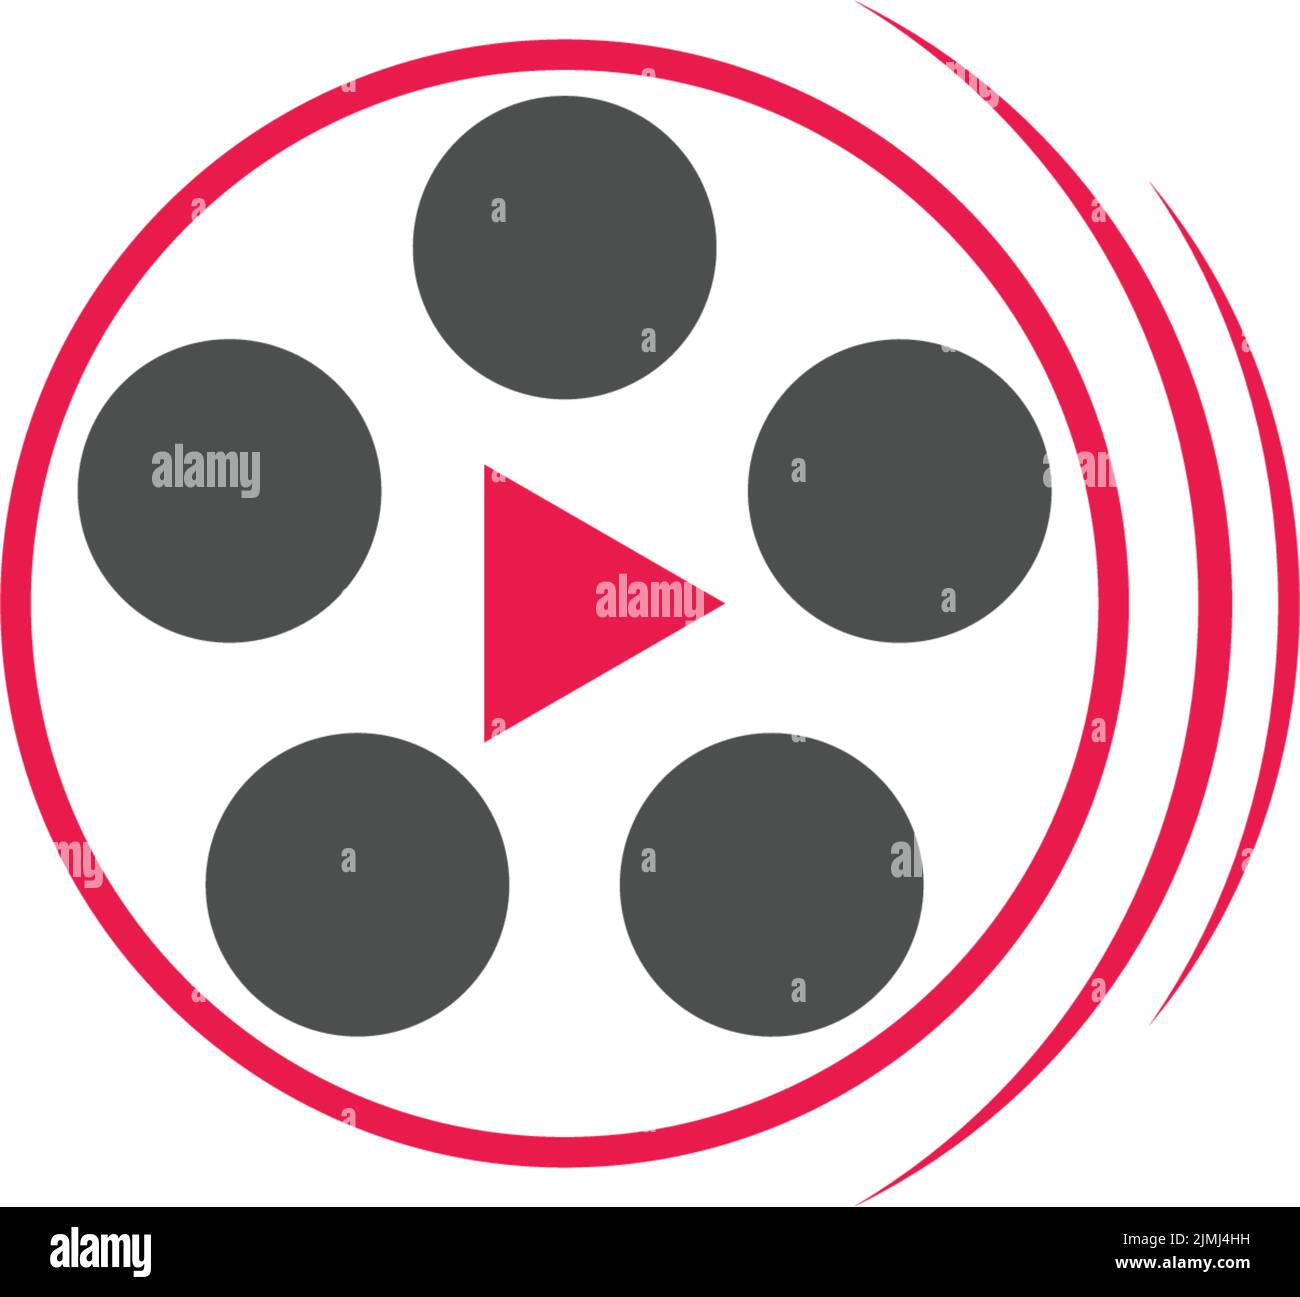 A vector flat design of film reel icon logo in red and black